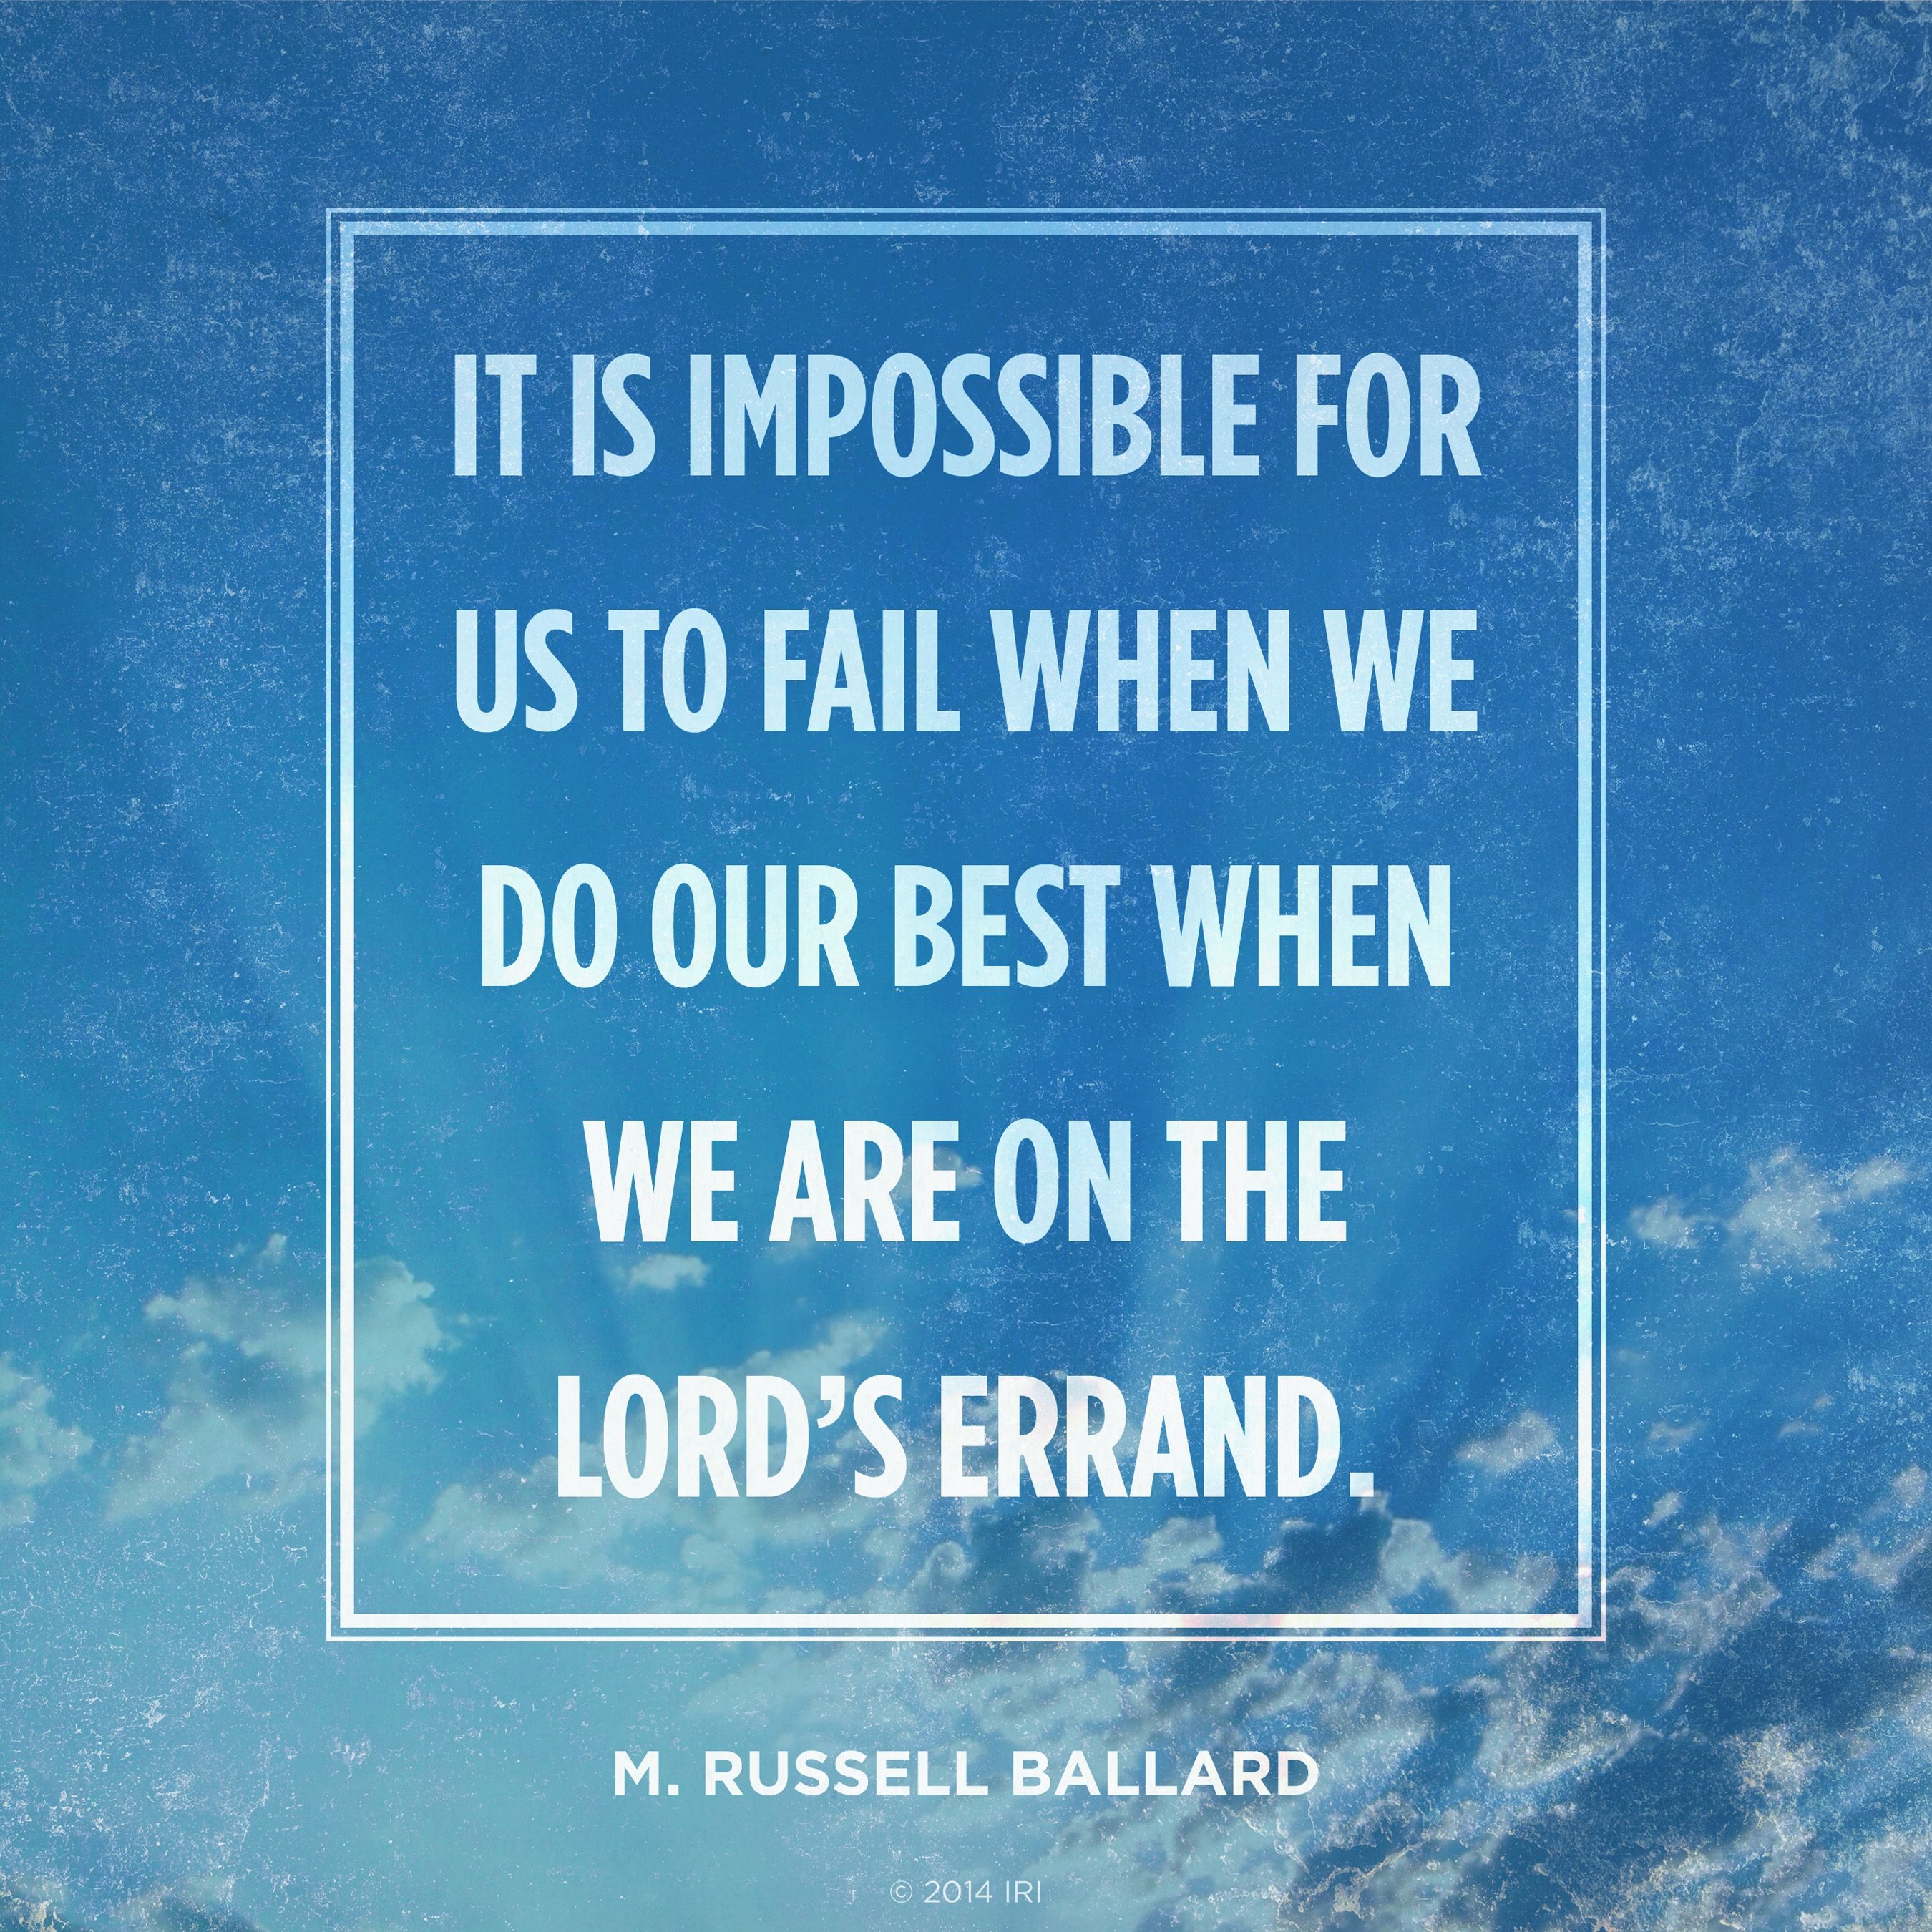 “It is impossible for us to fail when we do our best when we are on the Lord’s errand.”—Elder M. Russell Ballard, “Put Your Trust in the Lord”